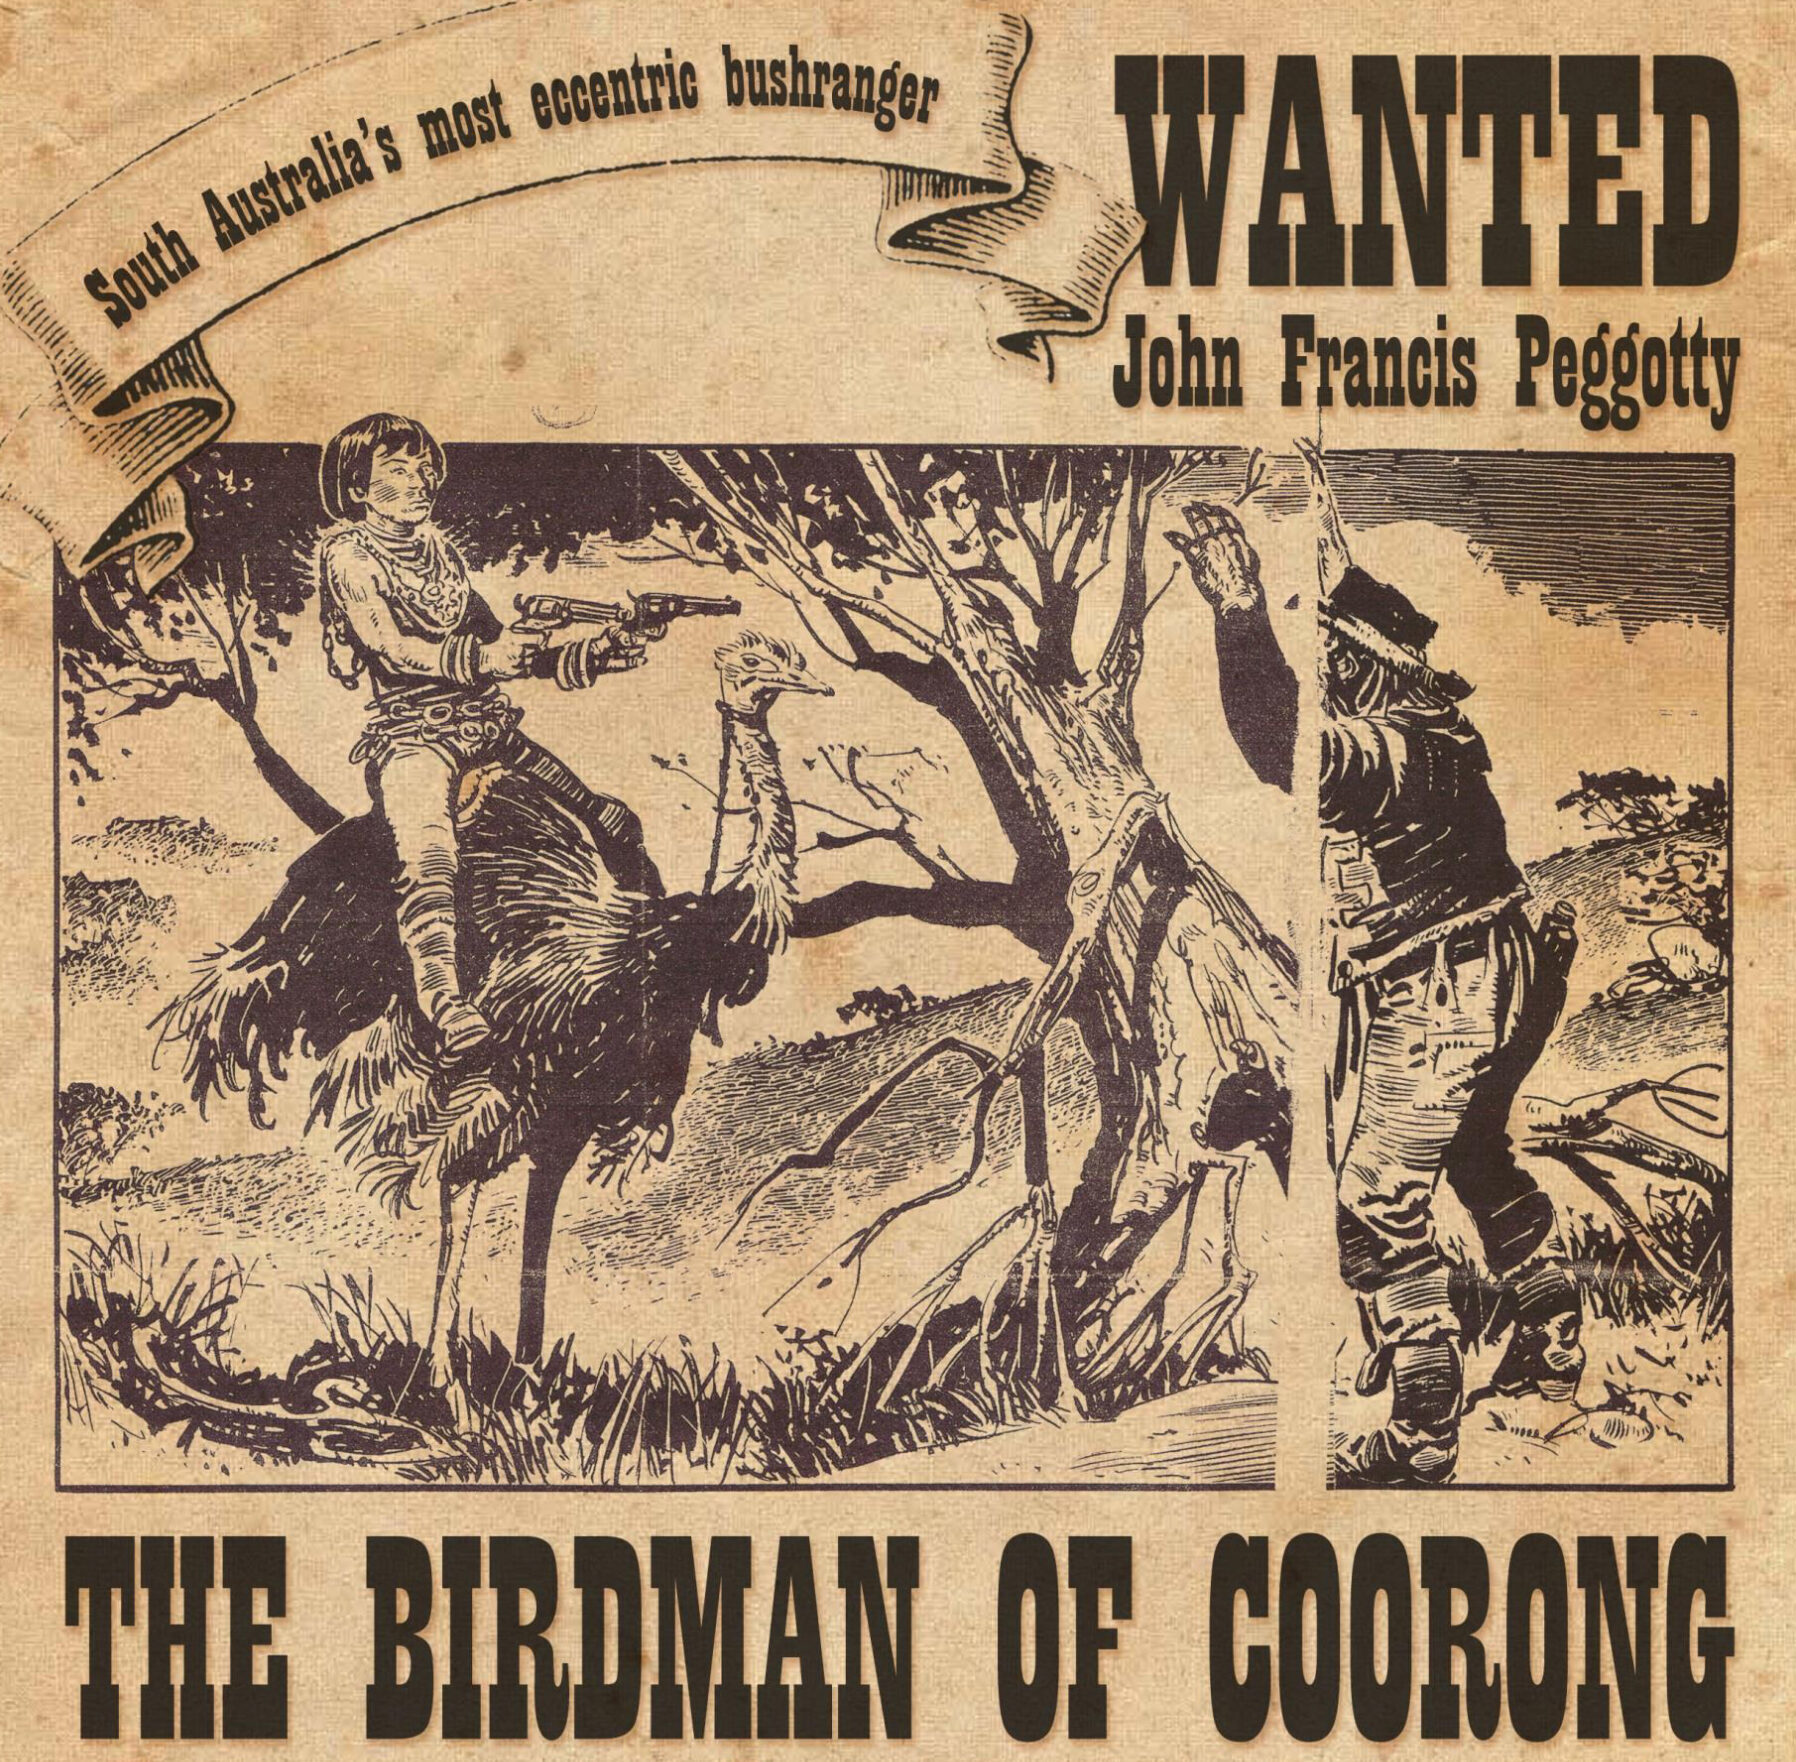 Image for article: Birdman of the Coorong